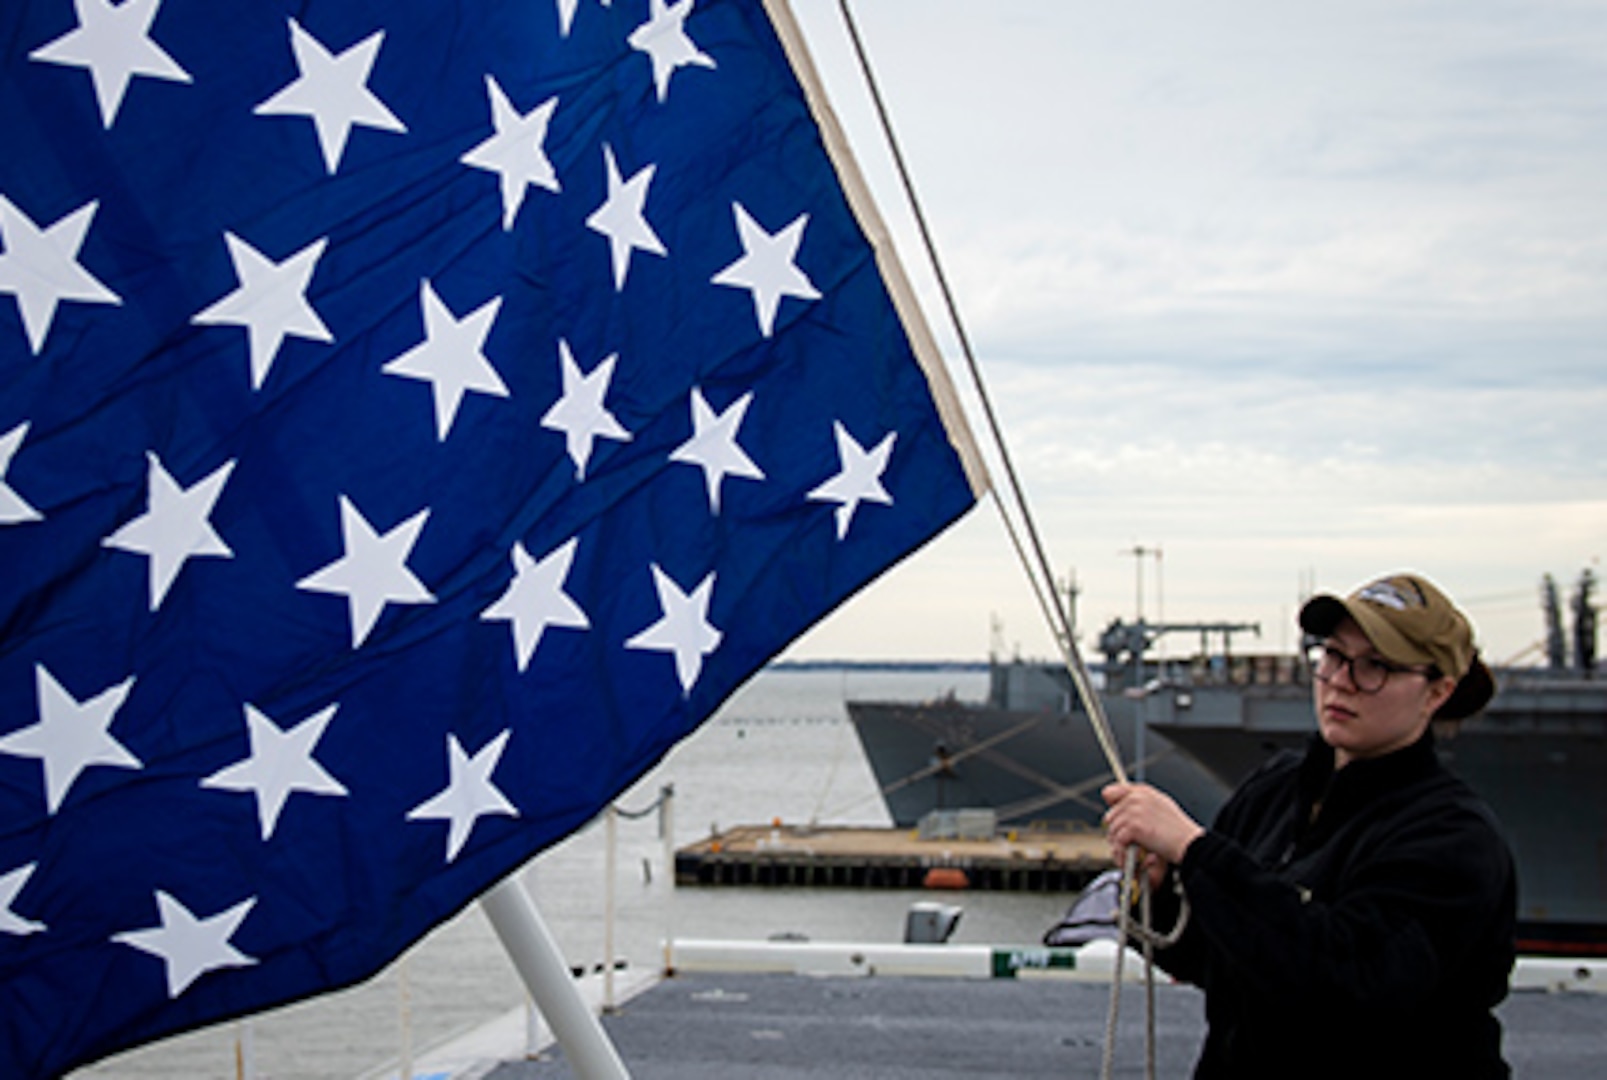 DLA assists U.S. Navy in reintroducing Union Jack flag on naval ships >  Defense Logistics Agency > News Article View